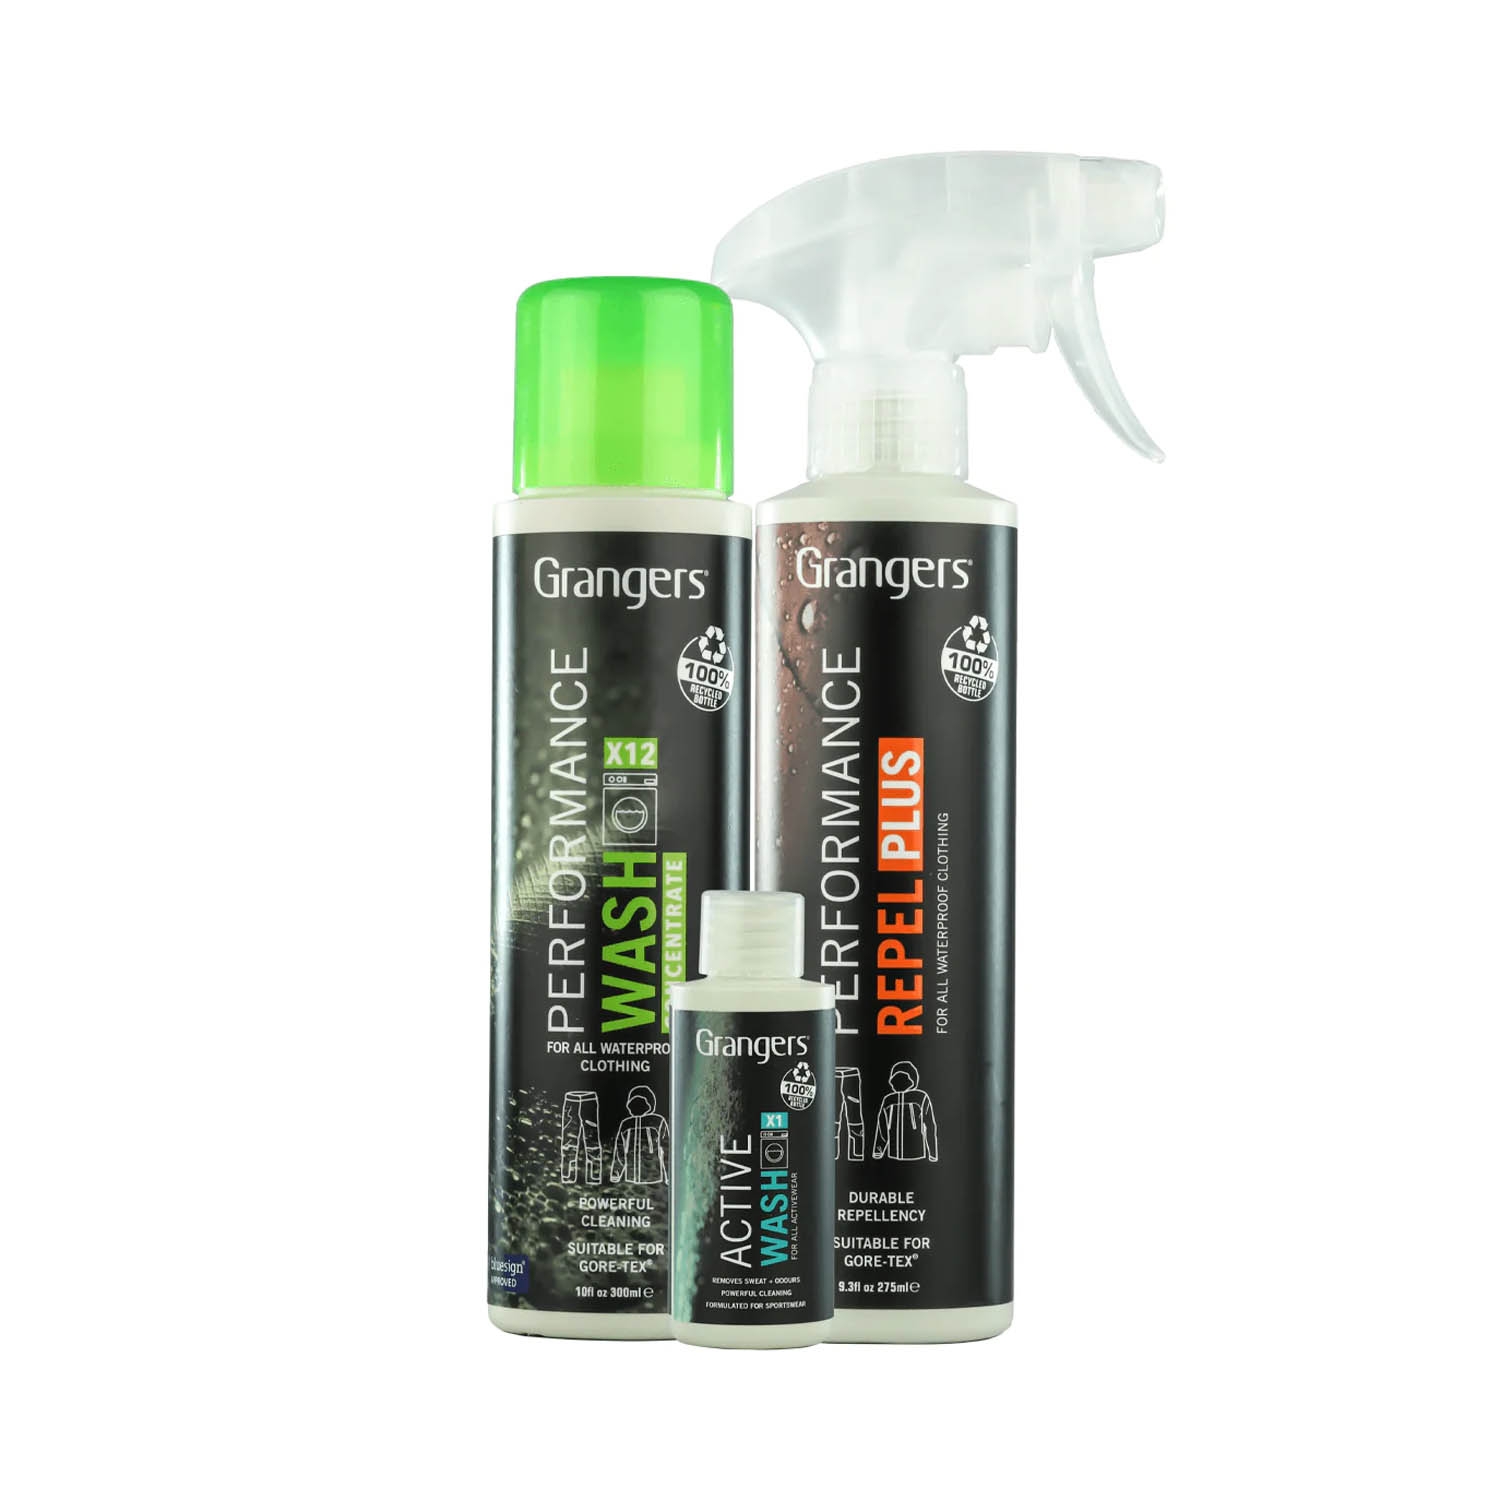 Grangers Hard Shell Care Kit / Cleaner and Waterproofing for